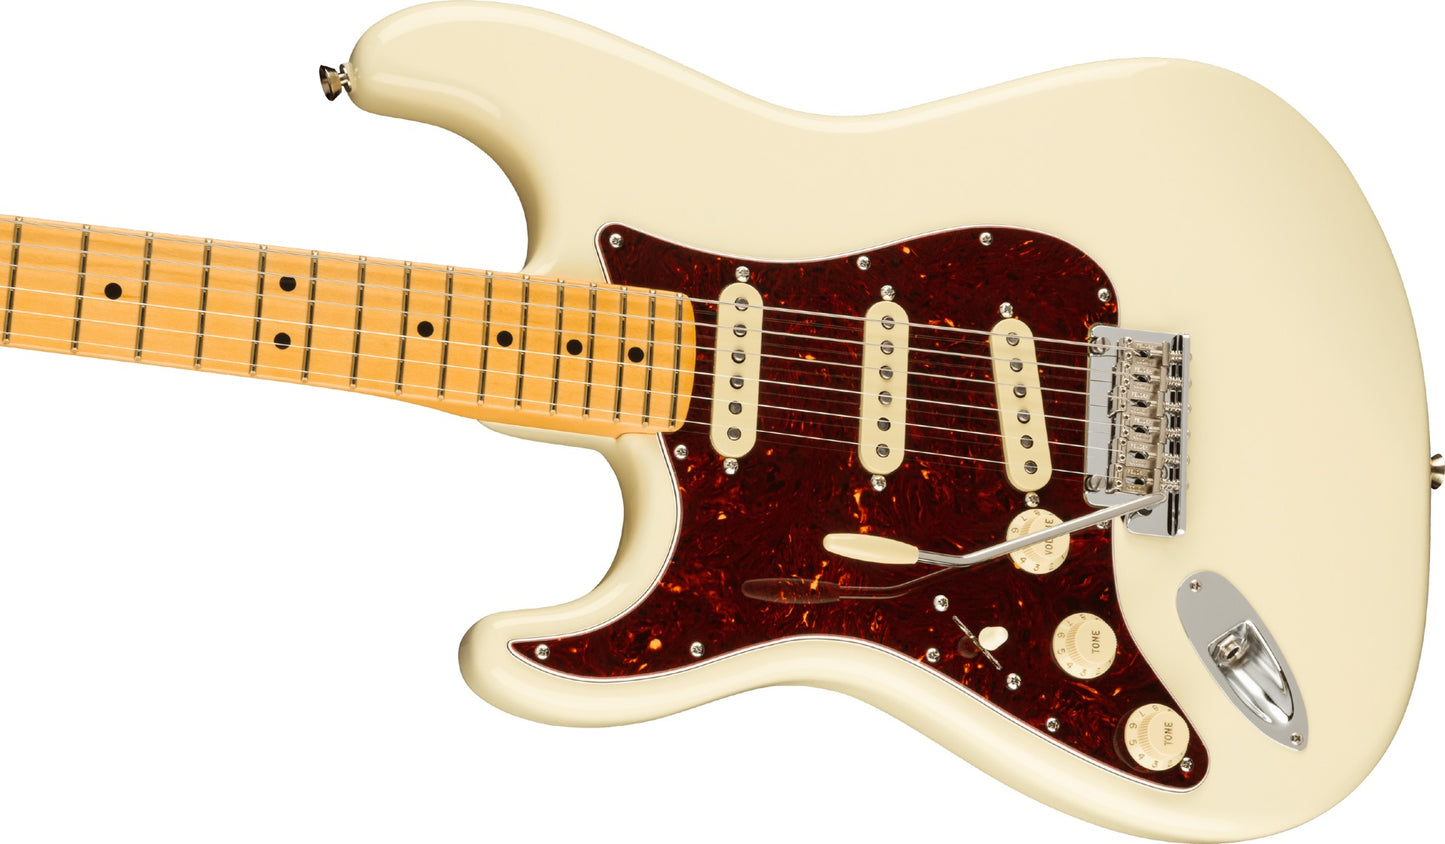 Fender American Professional II Stratocaster Left-Hand - Olympic White